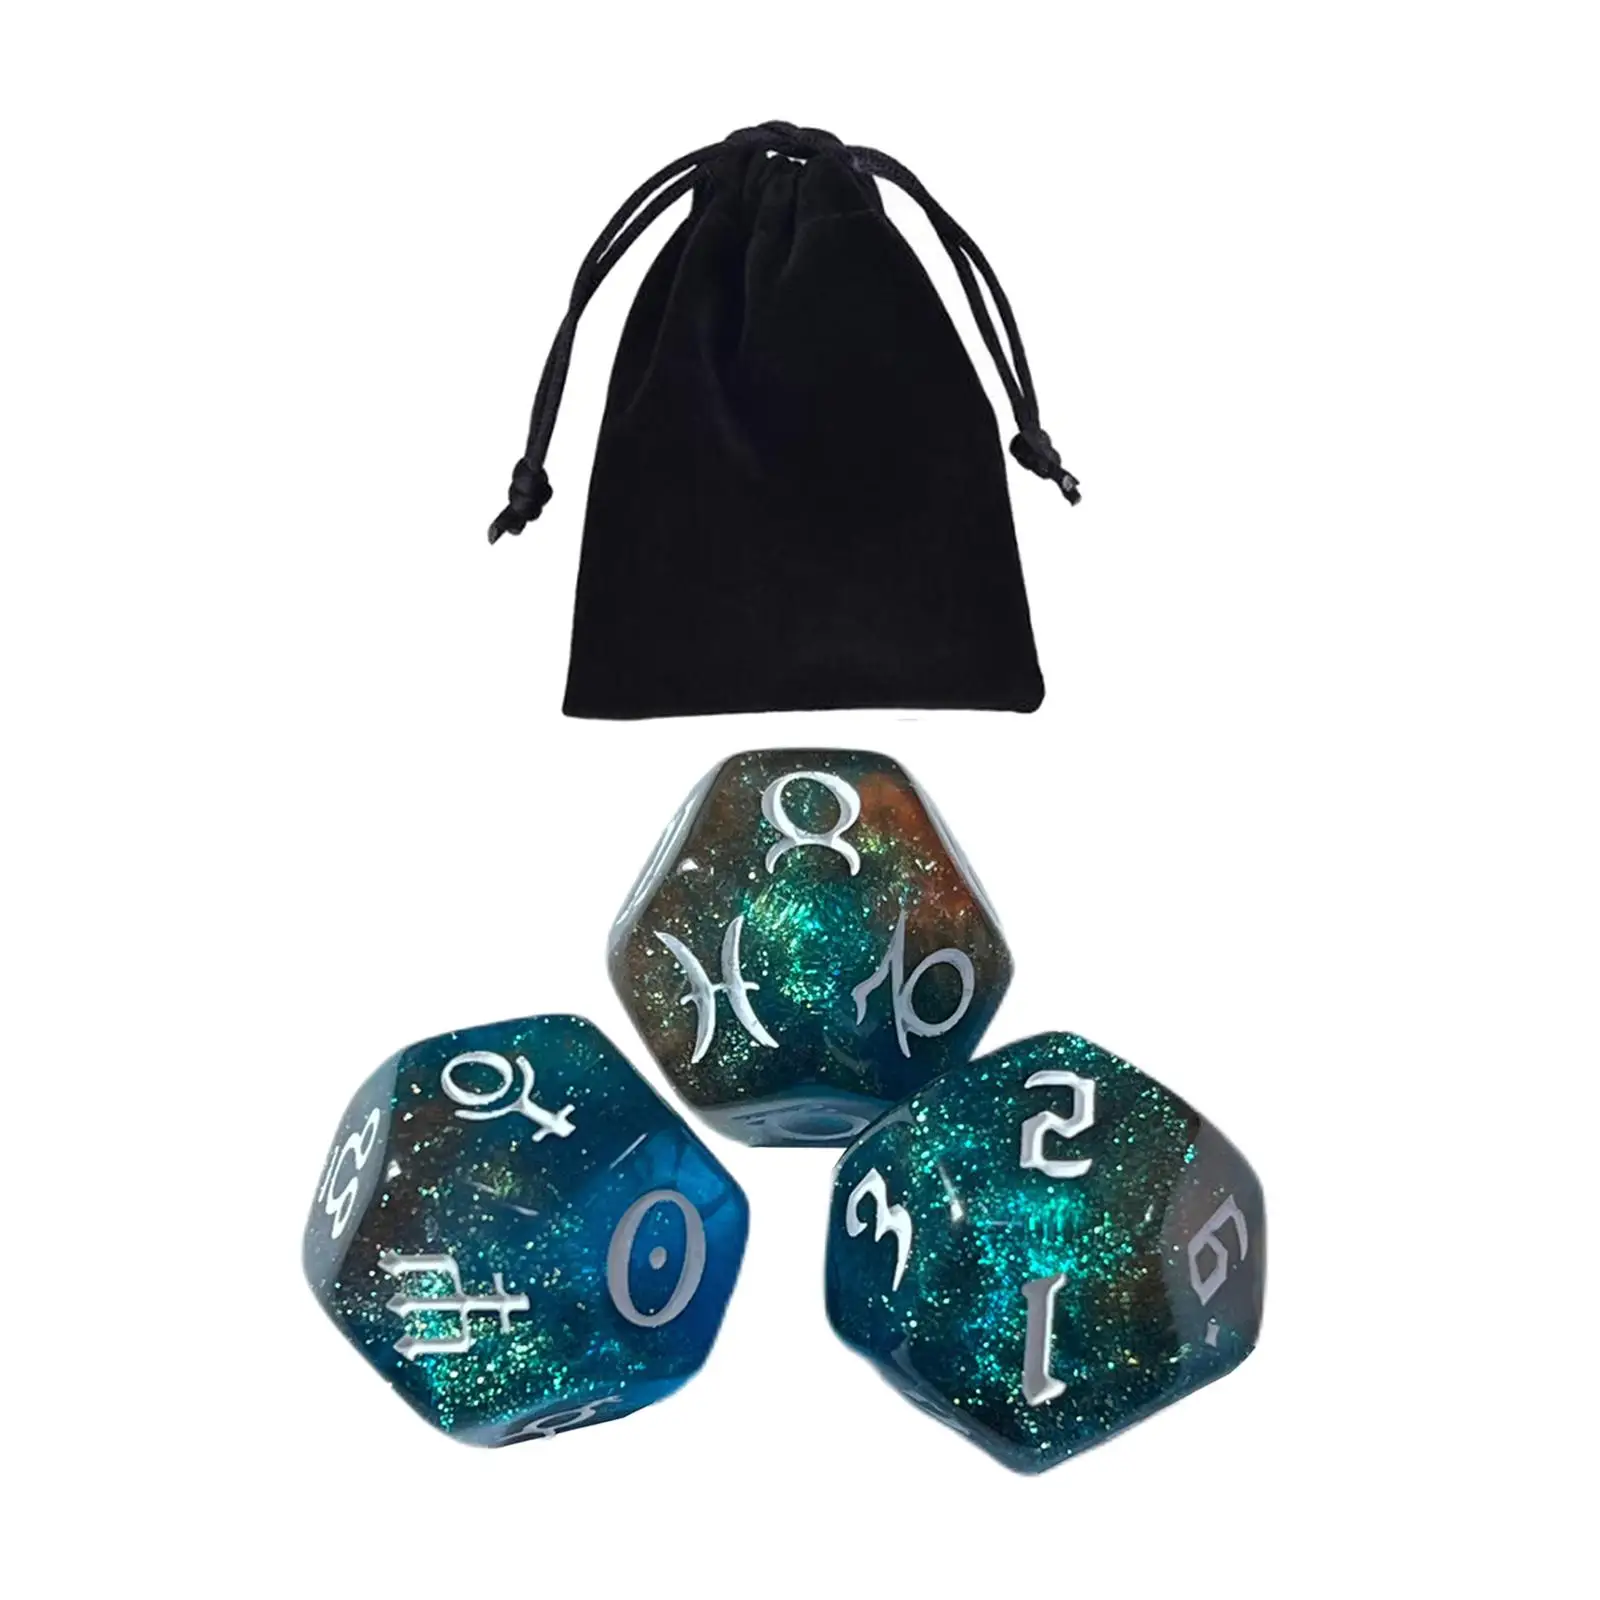 3 Pieces Acrylic Astrological Dice Constellation Dice Collectibles Polyhedral Dices with Pouch for Cards Party Accessory